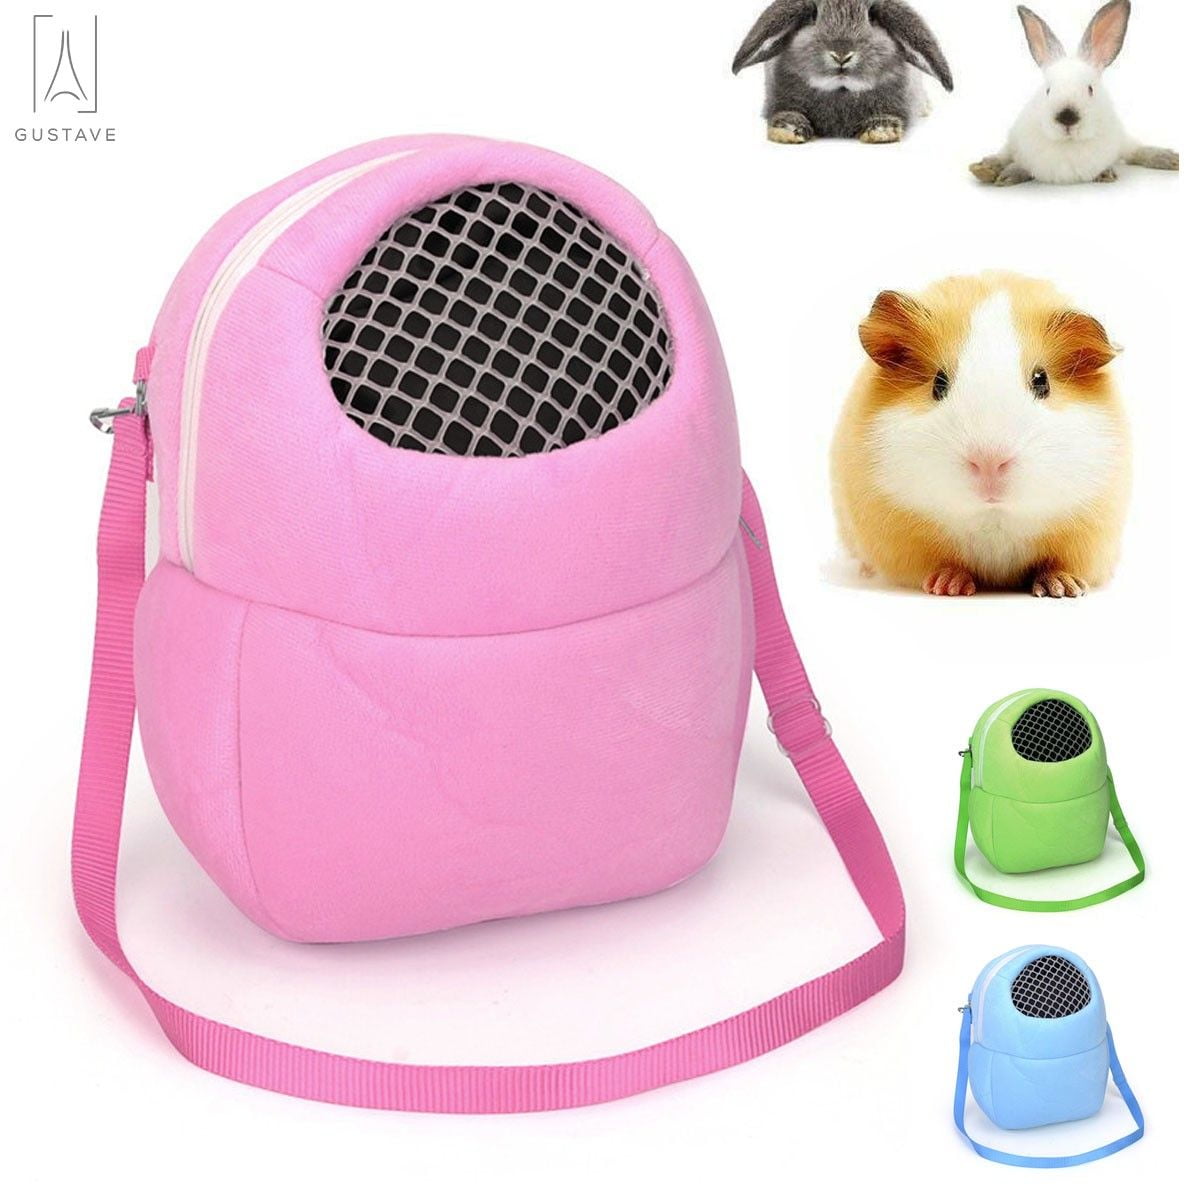 Hamster Carrier Bag -Cute Travel Sling for Small Pets Squirrels Shoulder Straps Guinea Pigs Rats Sugar Glider-Transport Pouch with Breathable Mesh Top Back Pocket Gerbils S Size 